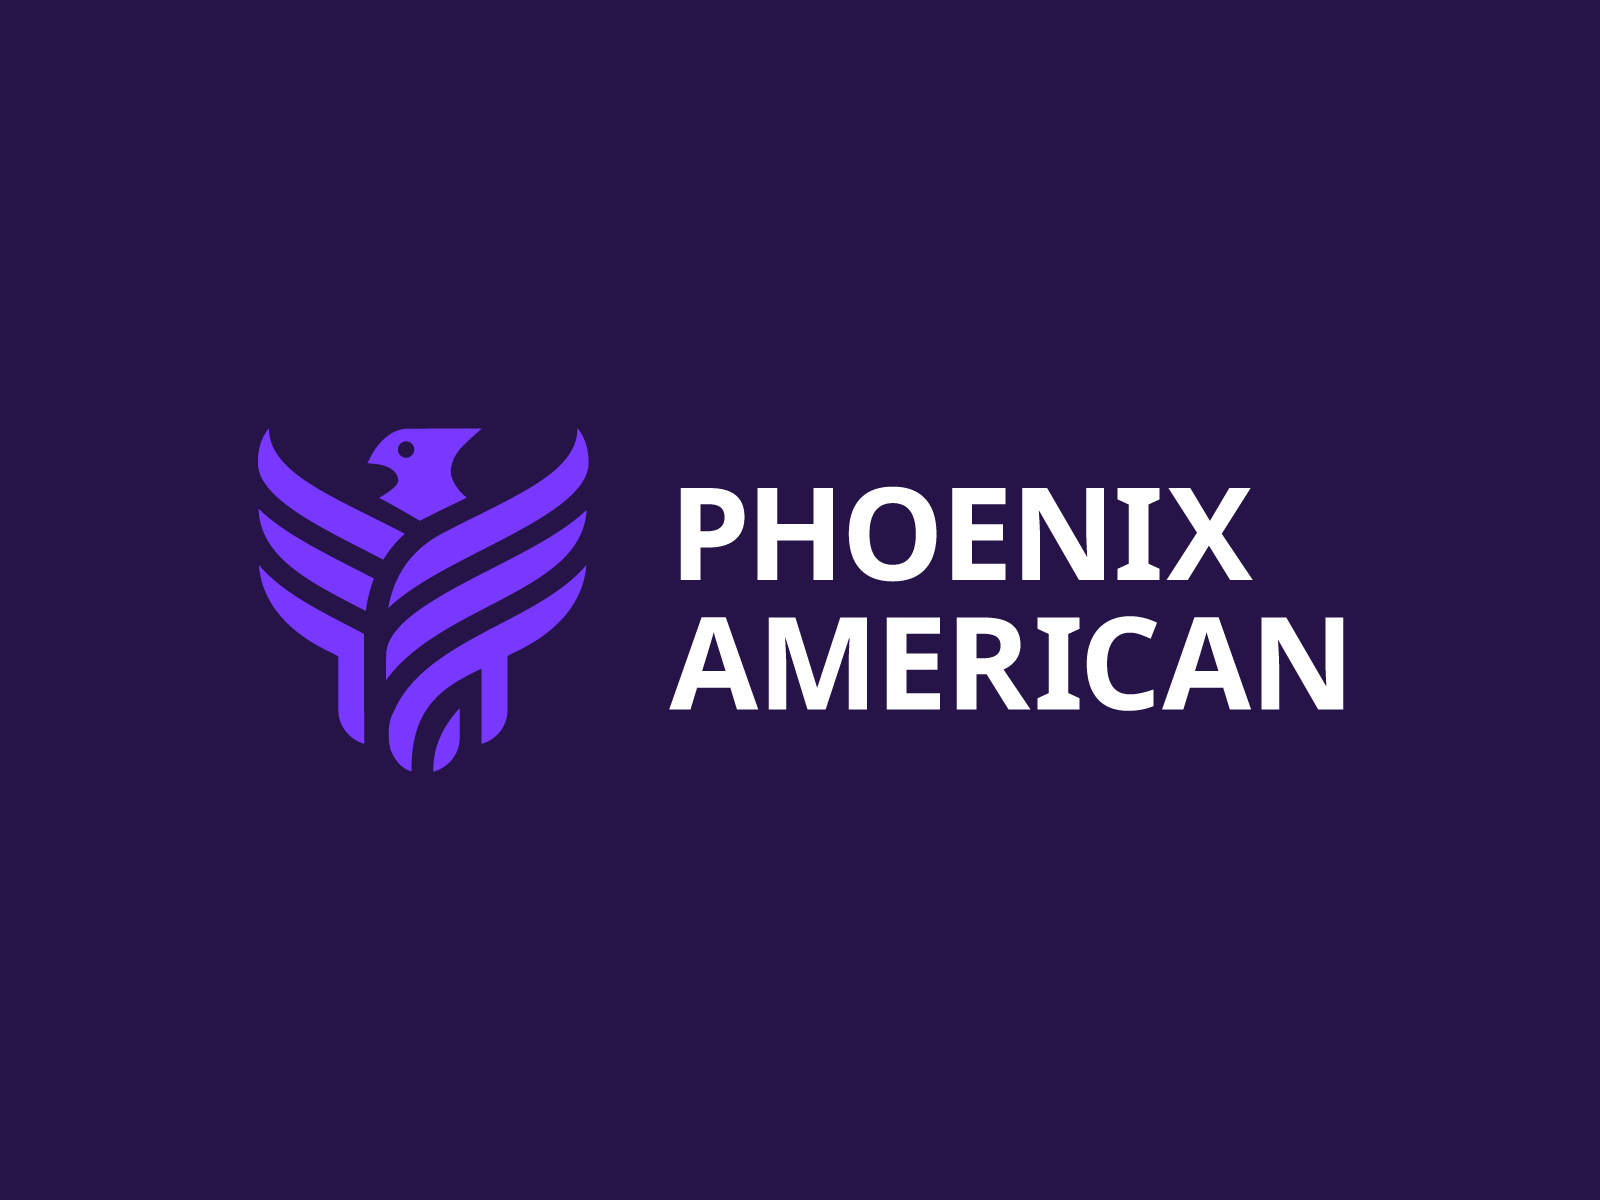 Phoenix American Financial Services and PAFS Ireland, Ltd Announce Robust 2019 Business Growth